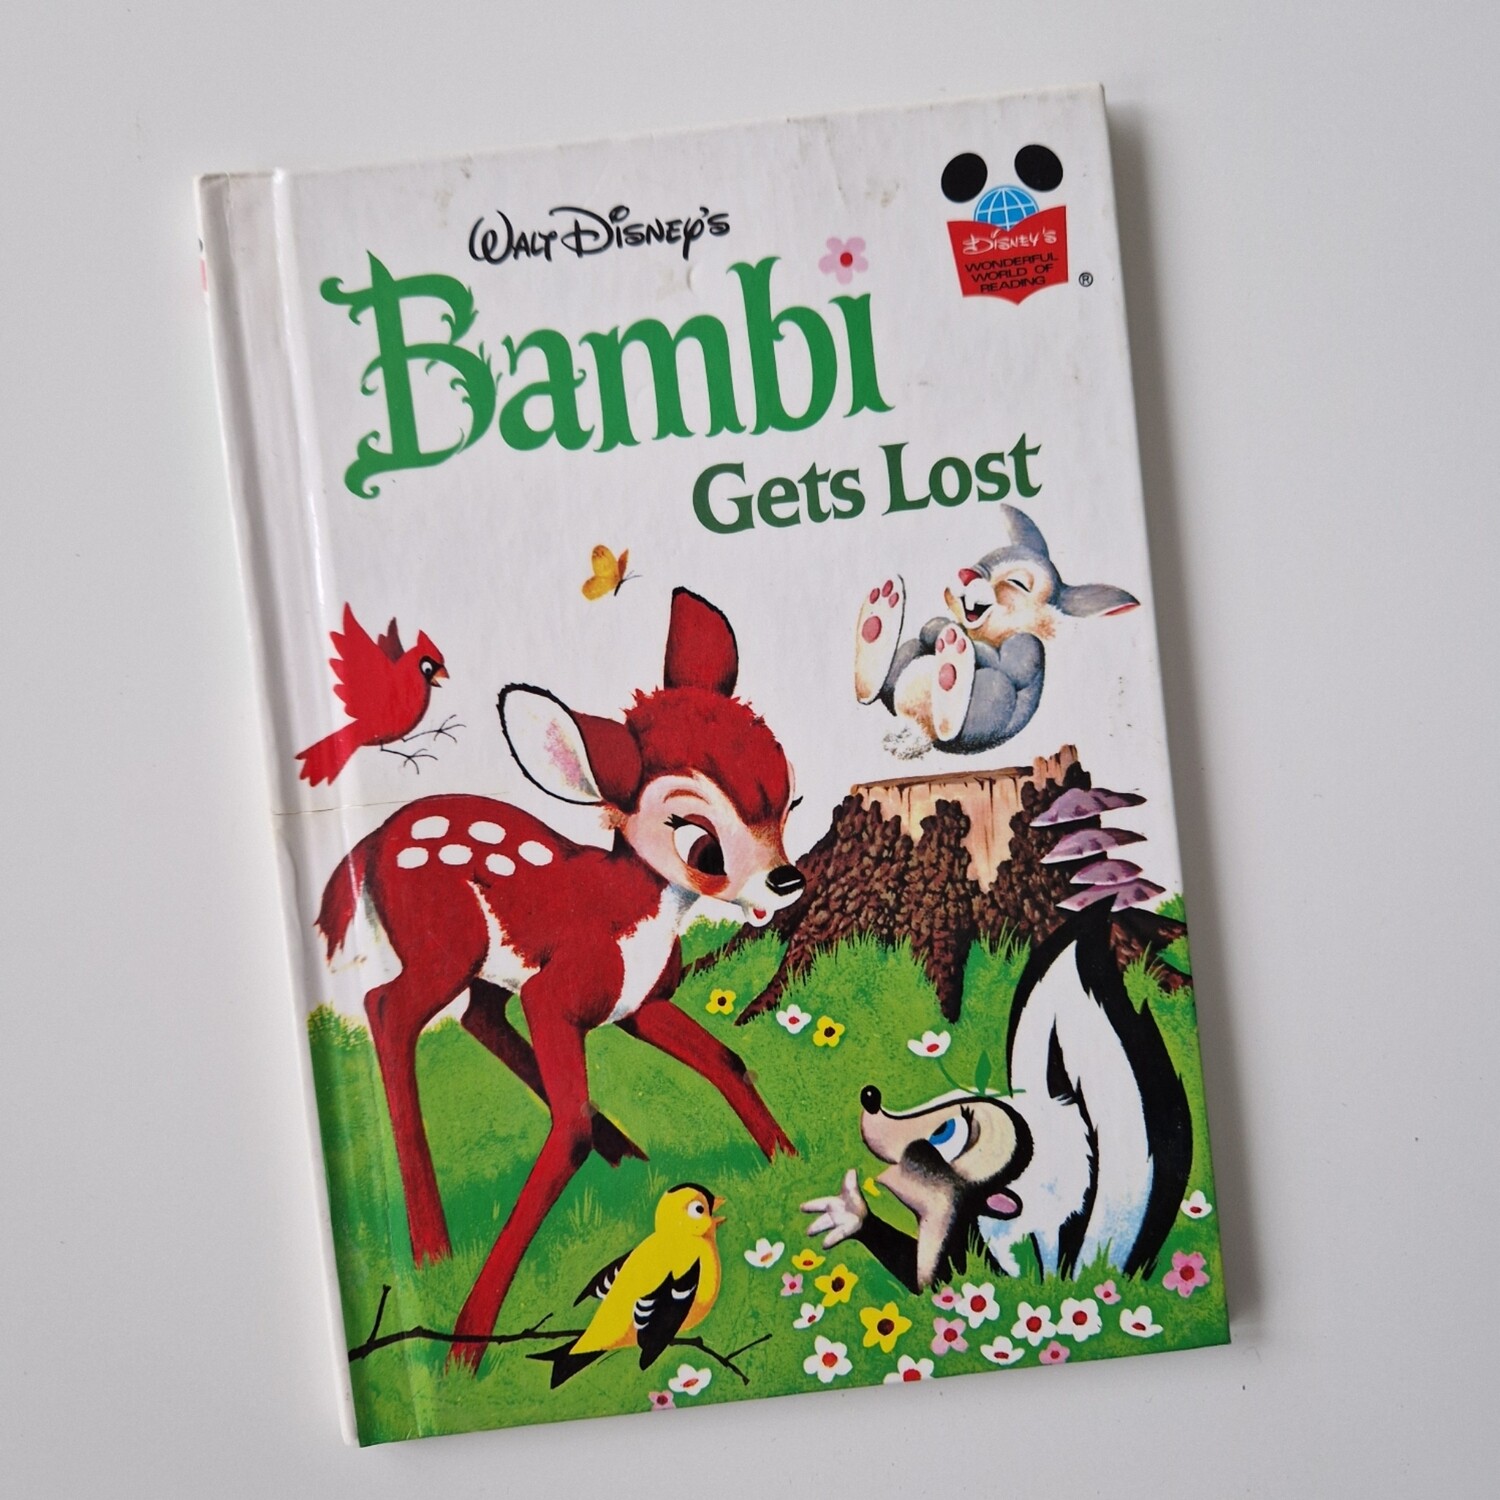 Bambi Notebook - Gets Lost